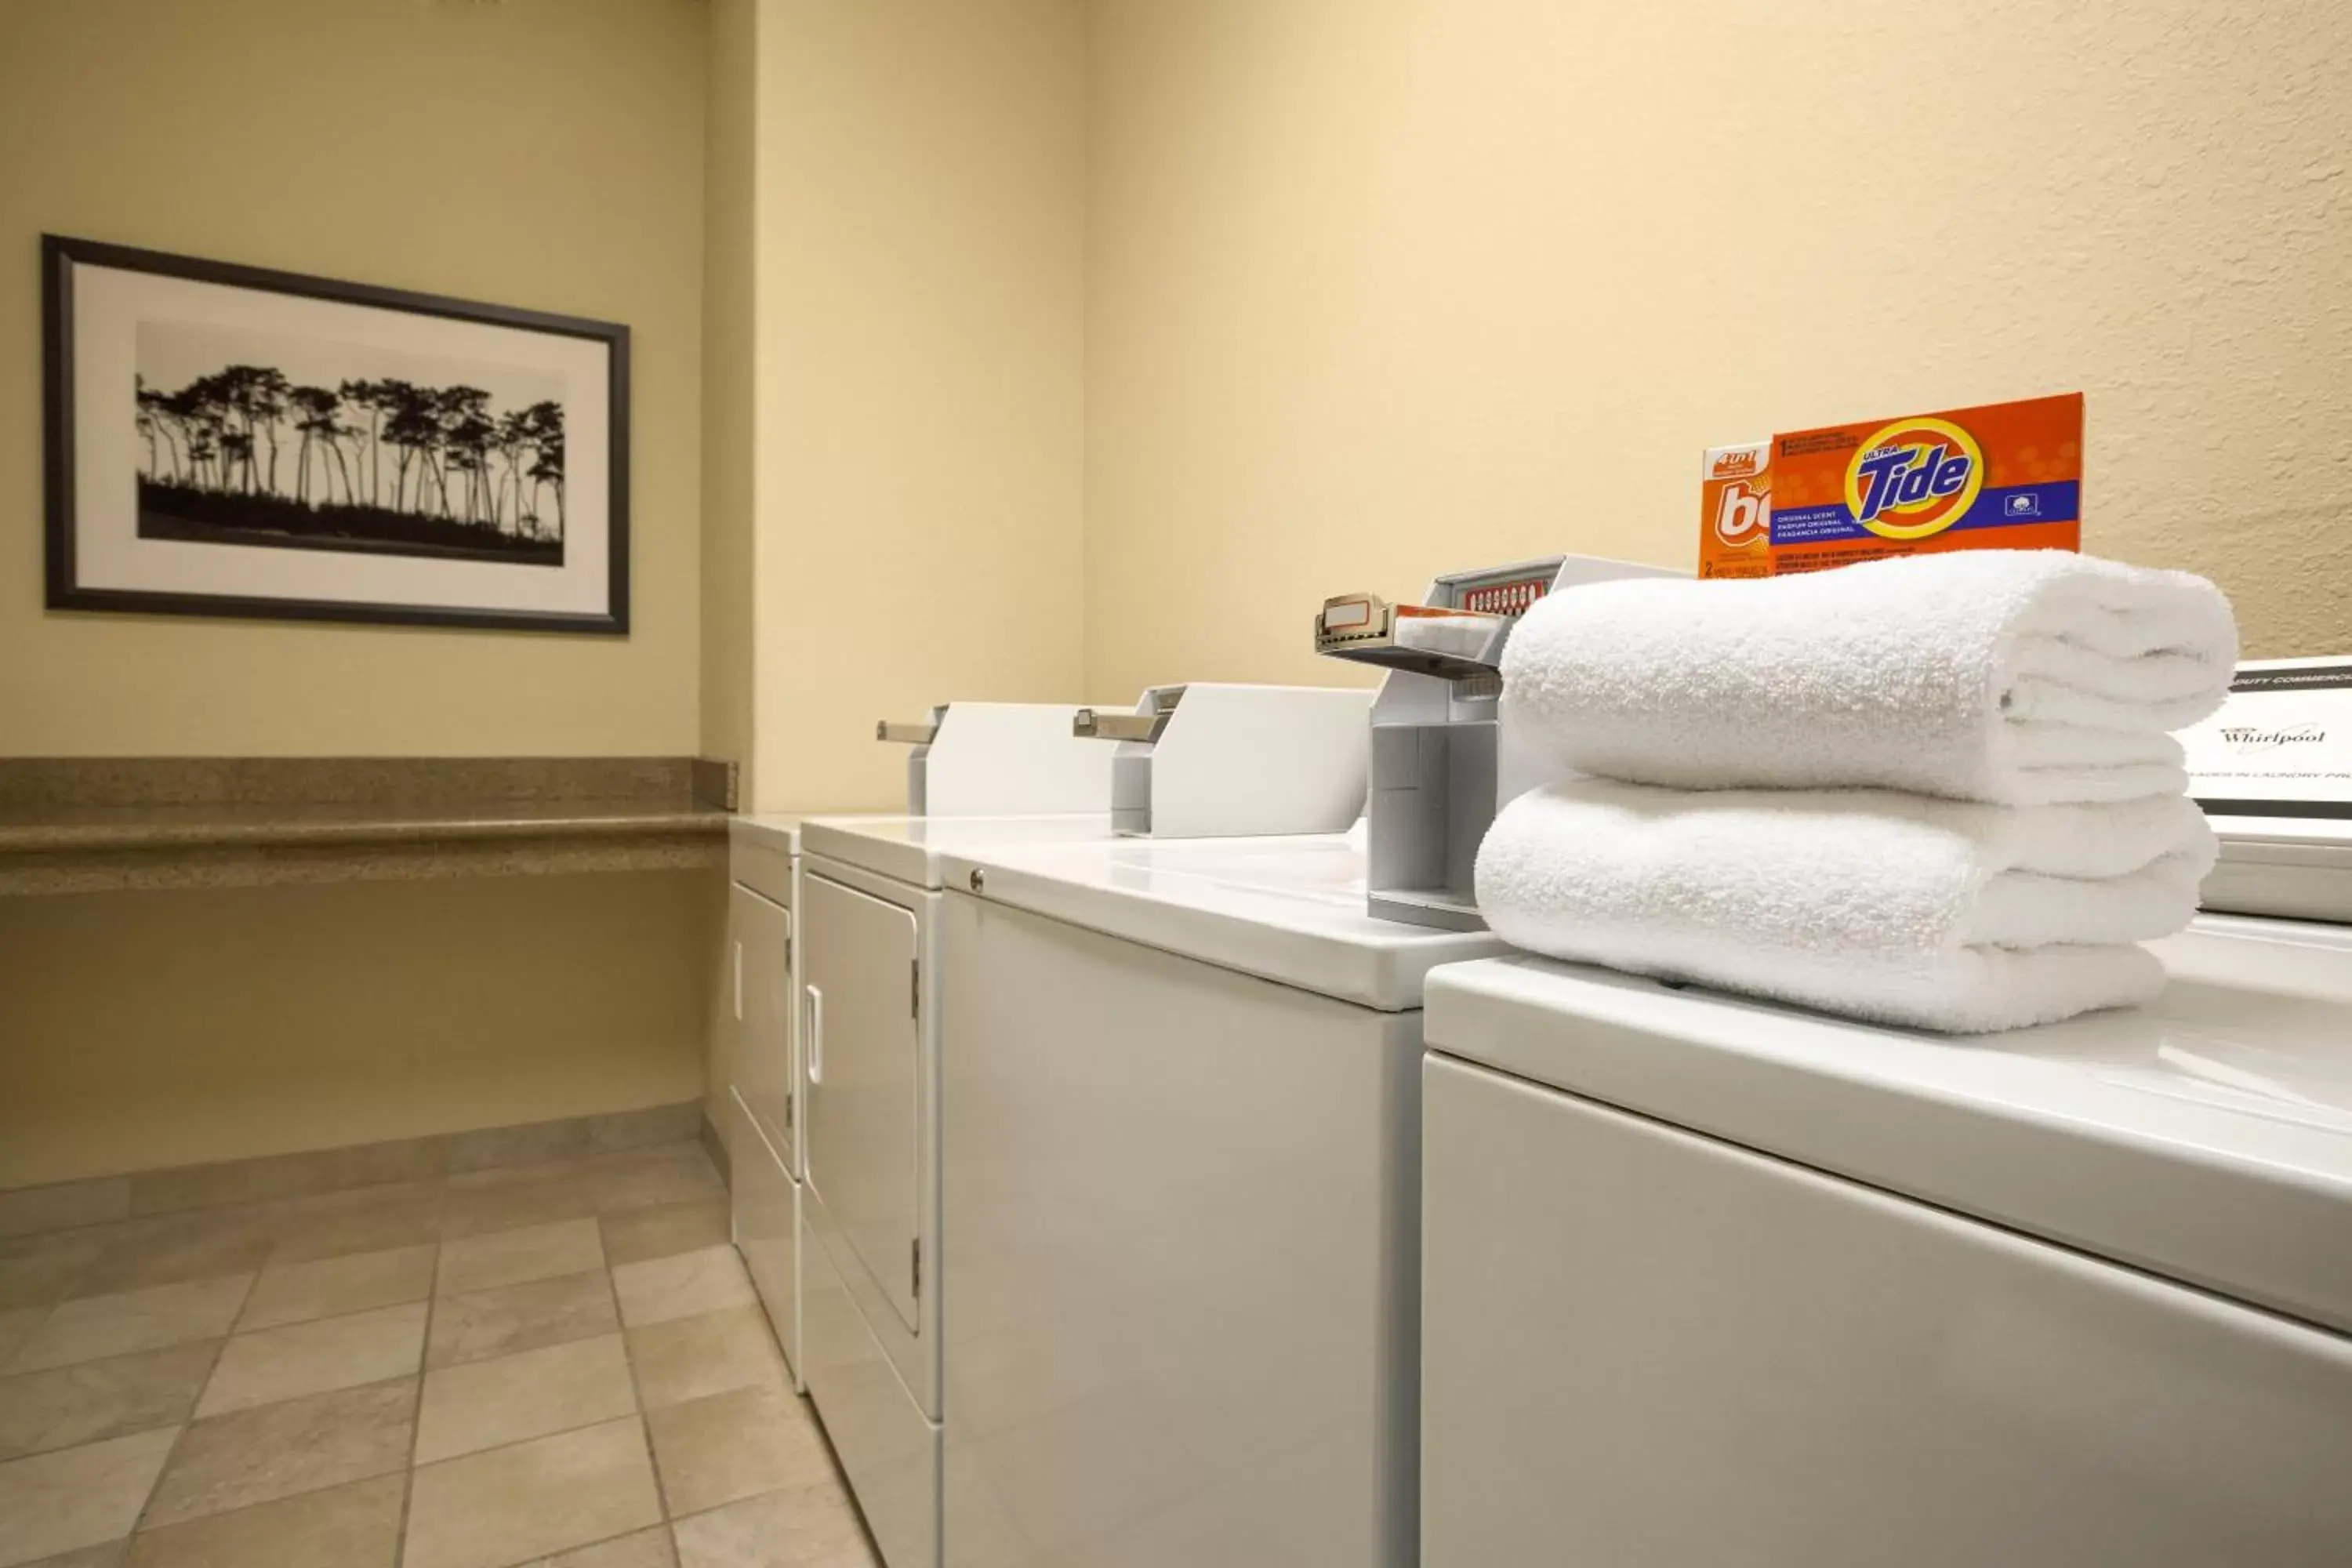 Area and facilities in Country Inn & Suites by Radisson, Lehighton (Jim Thorpe), PA